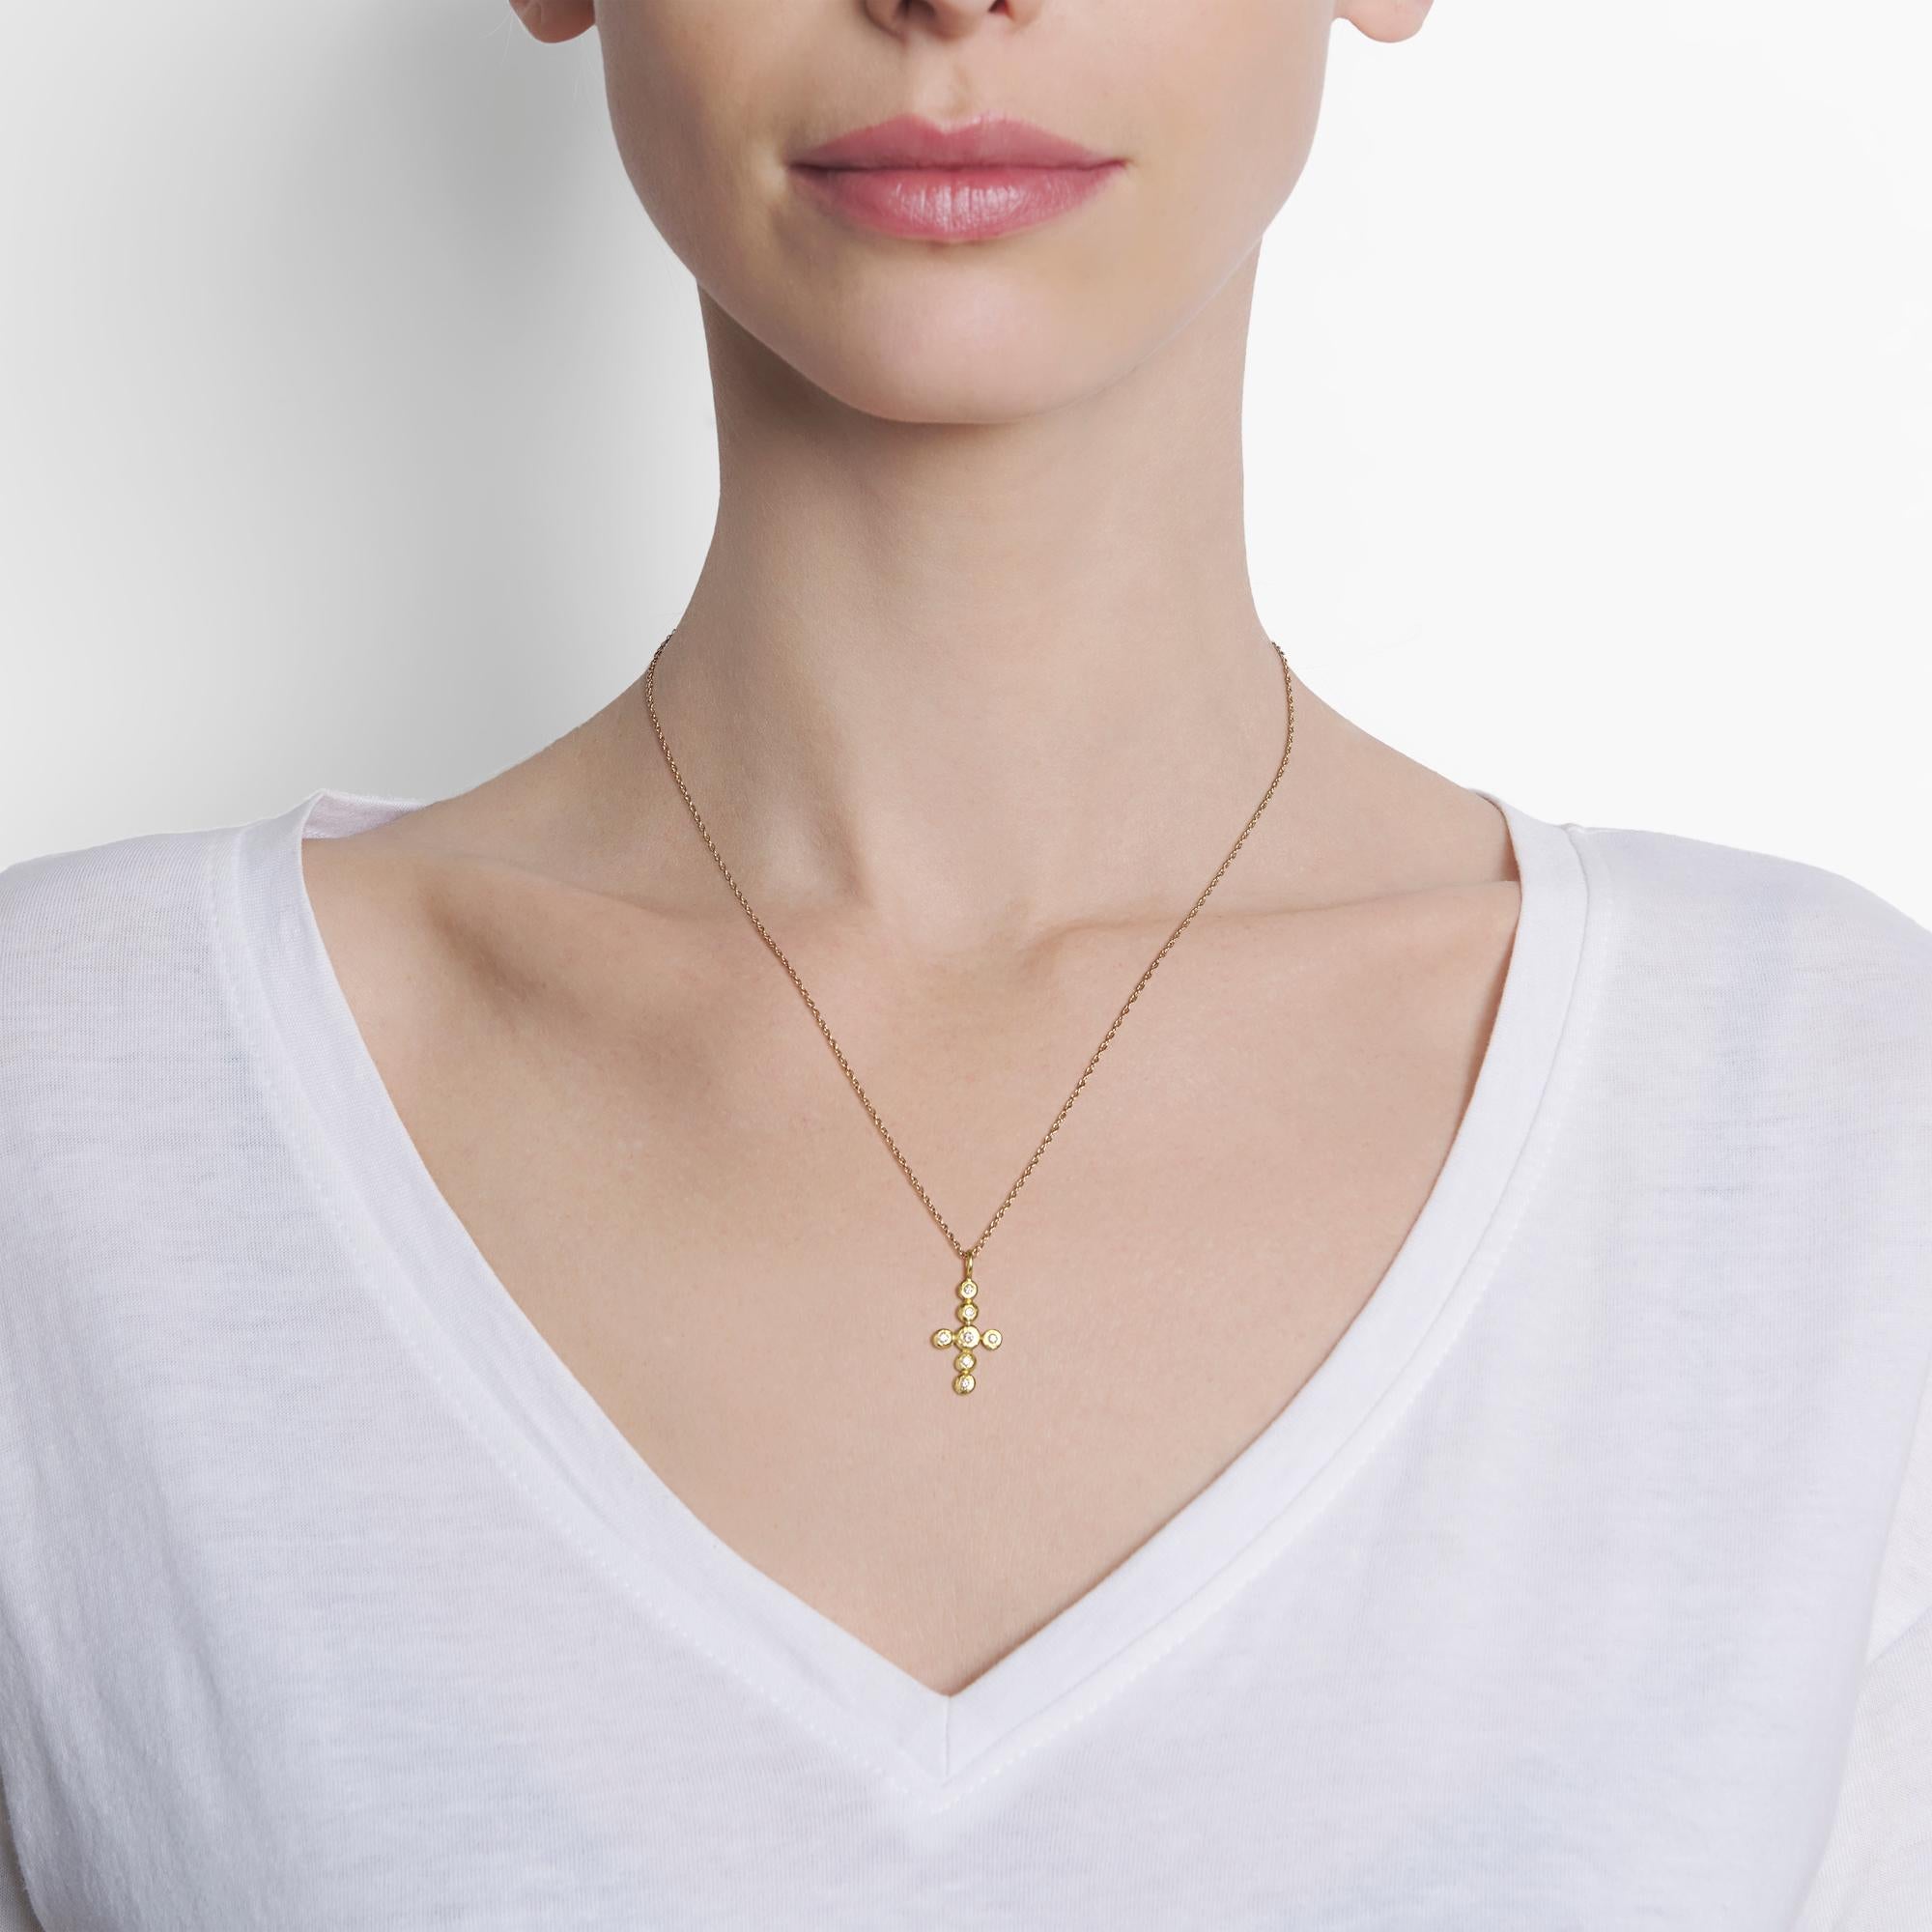 This very pretty 22 karat yellow gold cross charm is made of seven petite hammered disks with diamonds set inside. It measuring approximately one inch by one-half inch.  With an 18k yellow gold chain, this pendant necklace measures about 17